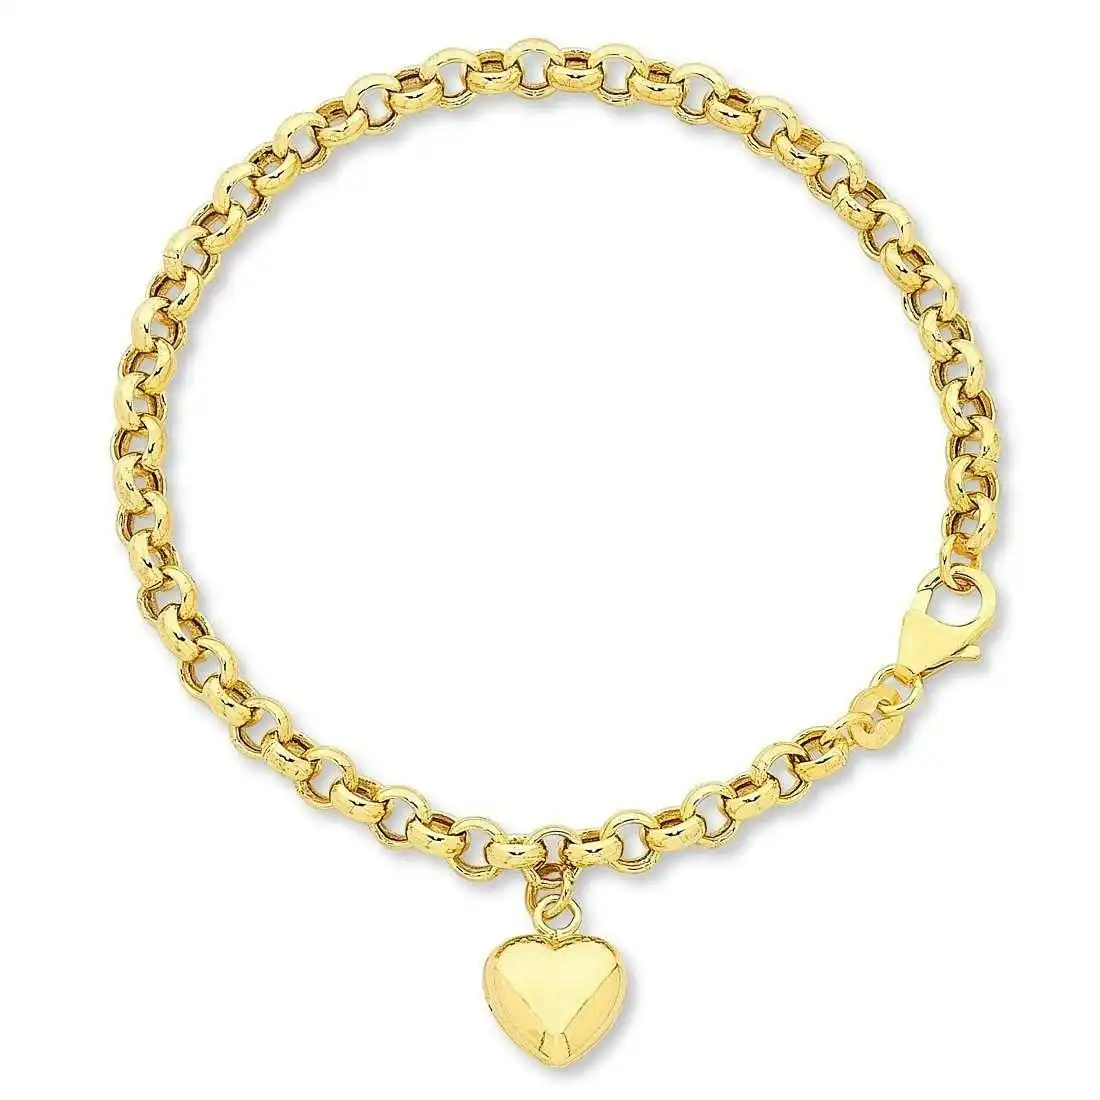 9ct Yellow Gold Silver Infused Heart Charm Bracelet